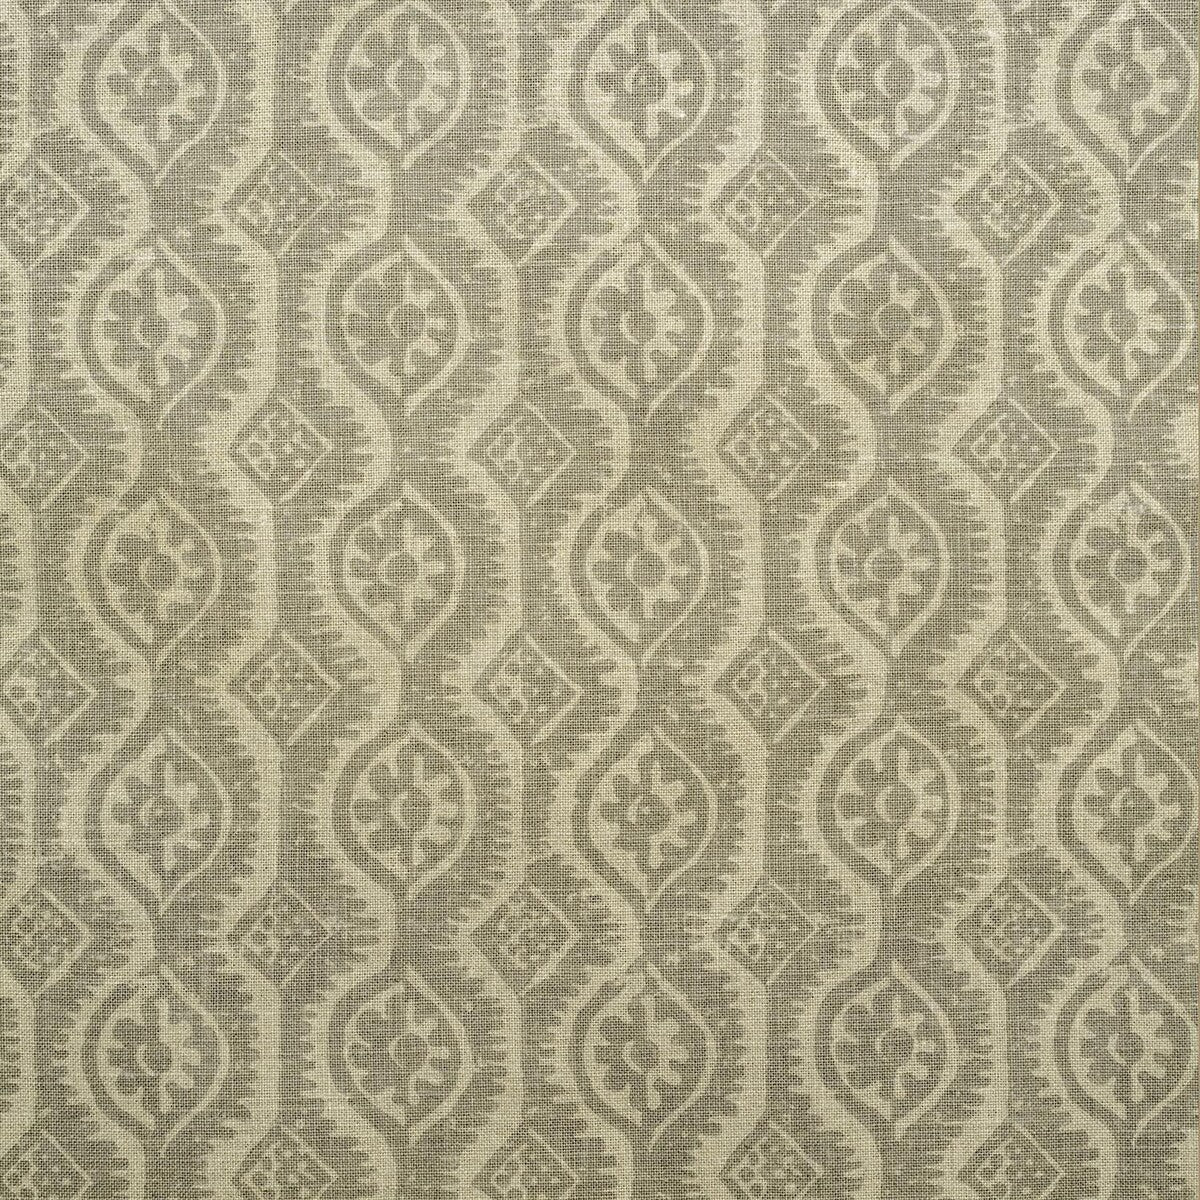 Small Damask fabric in grey color - pattern BFC-3642.11.0 - by Lee Jofa in the Blithfield collection